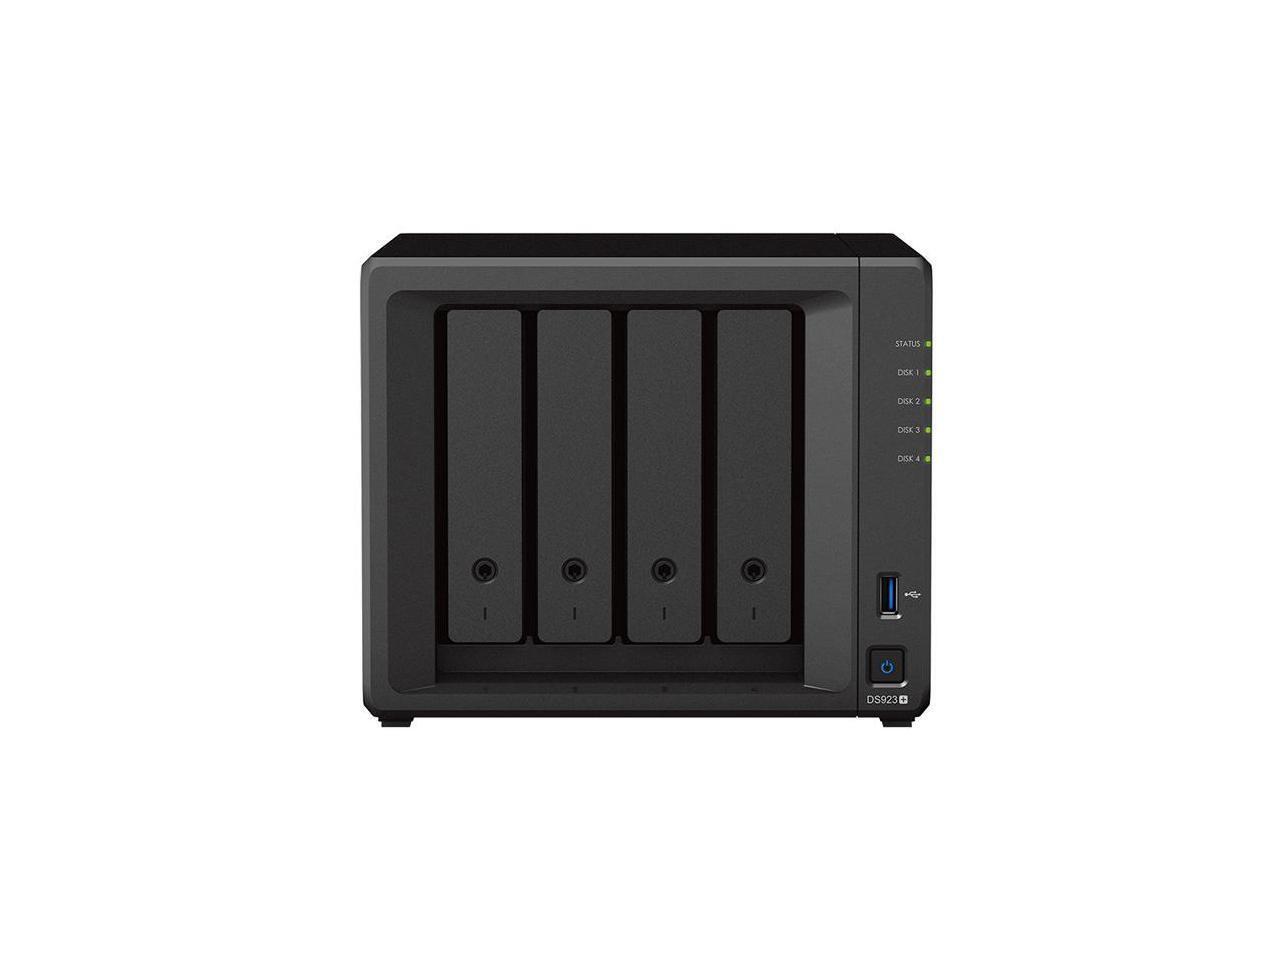 Synology DiskStation DS923+ (4Bay/AMD/4GB) NAS Network Storage Server Home Perso